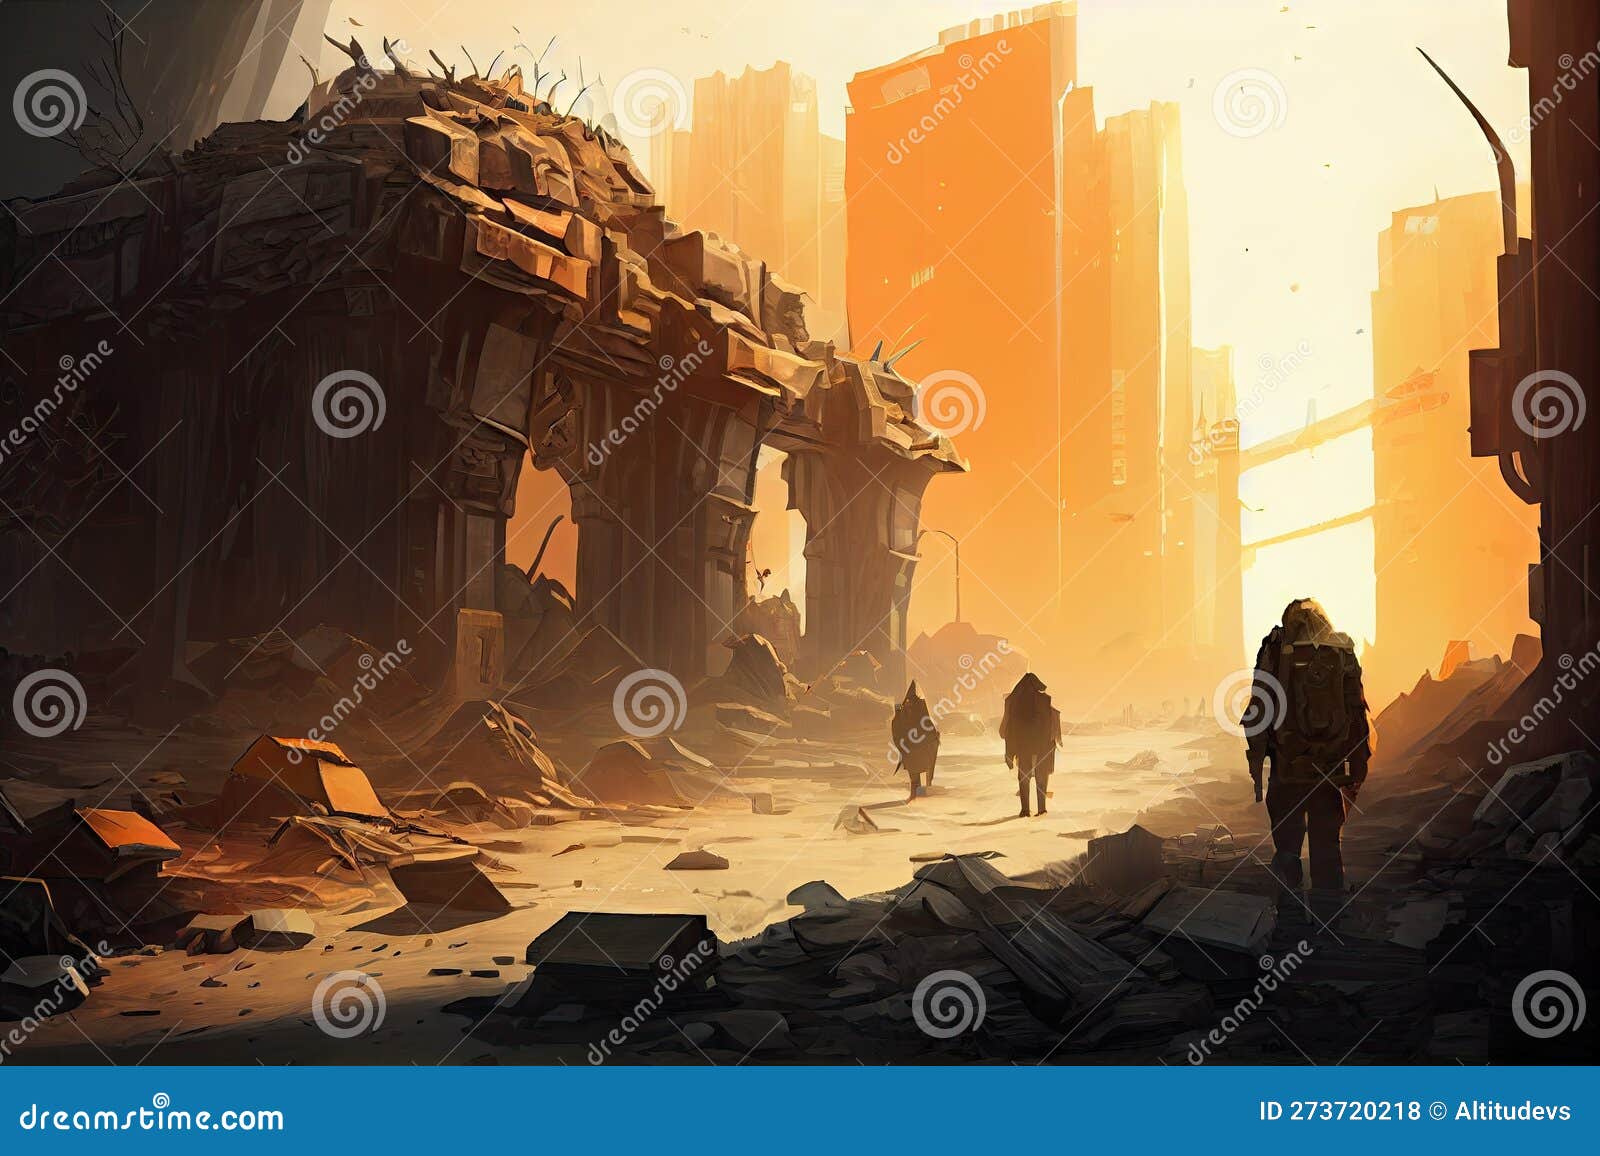 postapocalyptic city, with scavengers picking through the remains of a fallen civilization